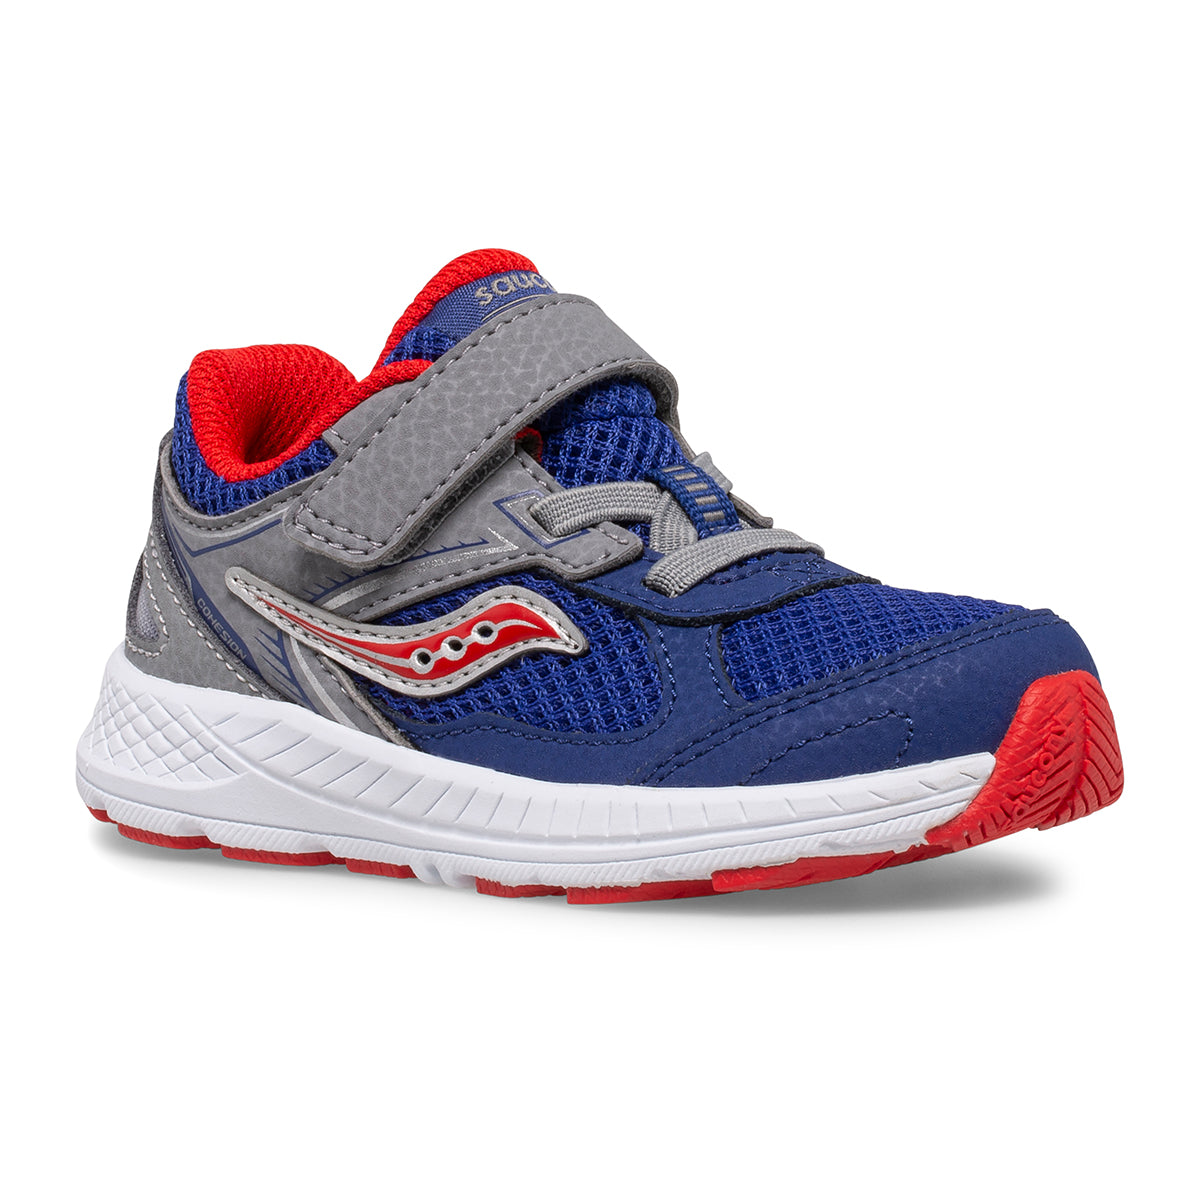 Cohesion 14 A/C Jr. Sneaker Navy/Red